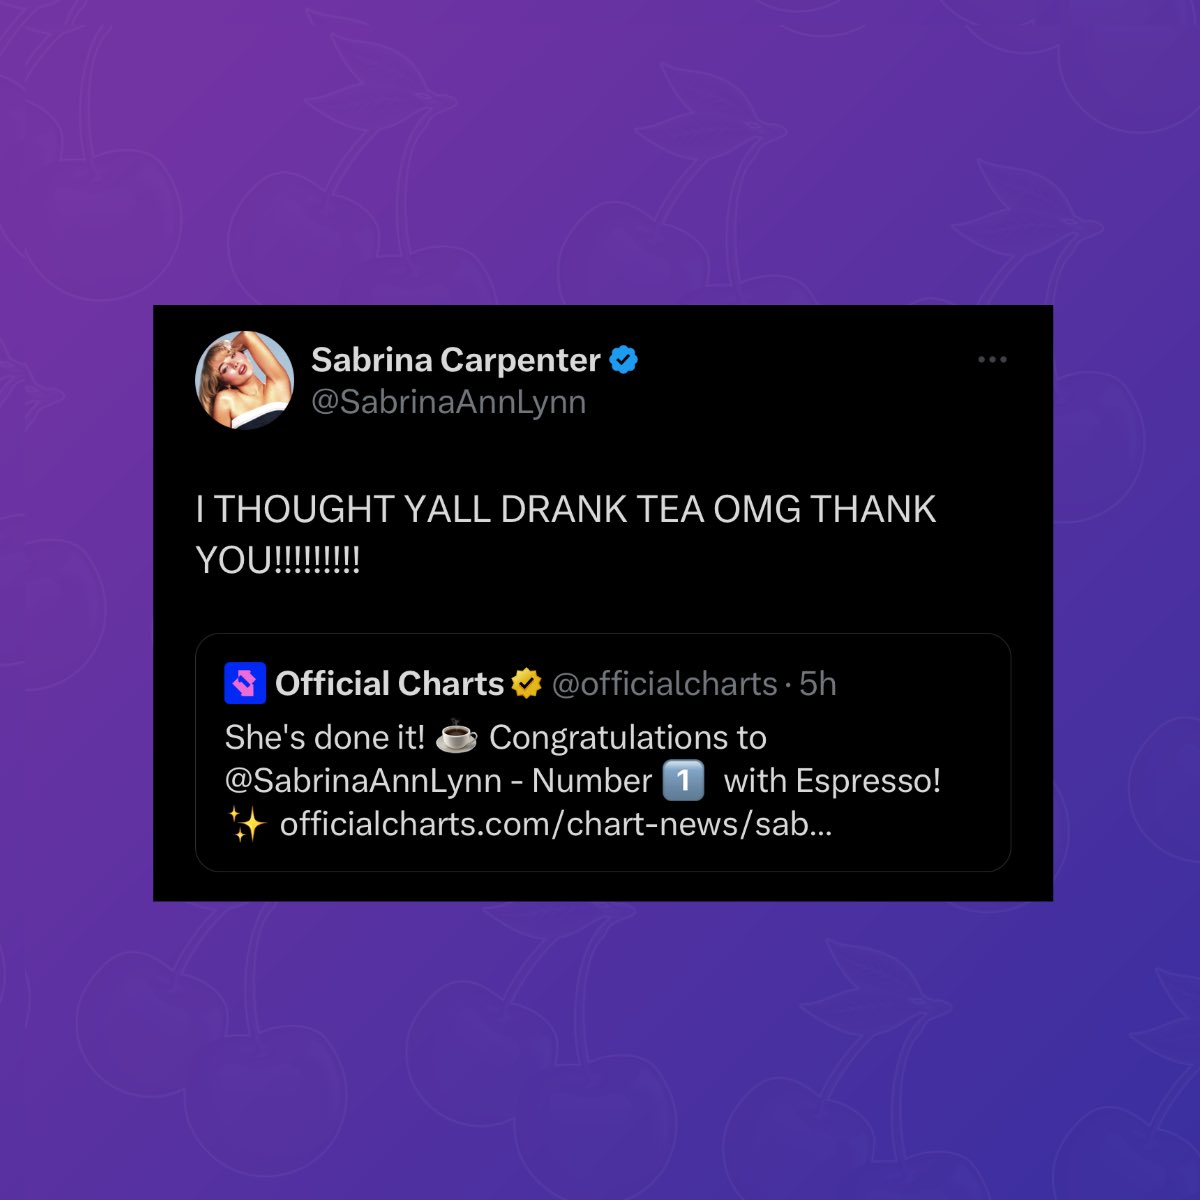 Sabrina Carpenter celebrates ‘Espresso’ going #1 on the UK Singles chart this week: “I THOUGHT YALL DRANK TEA OMG THANK YOU!!!!!!!!!”